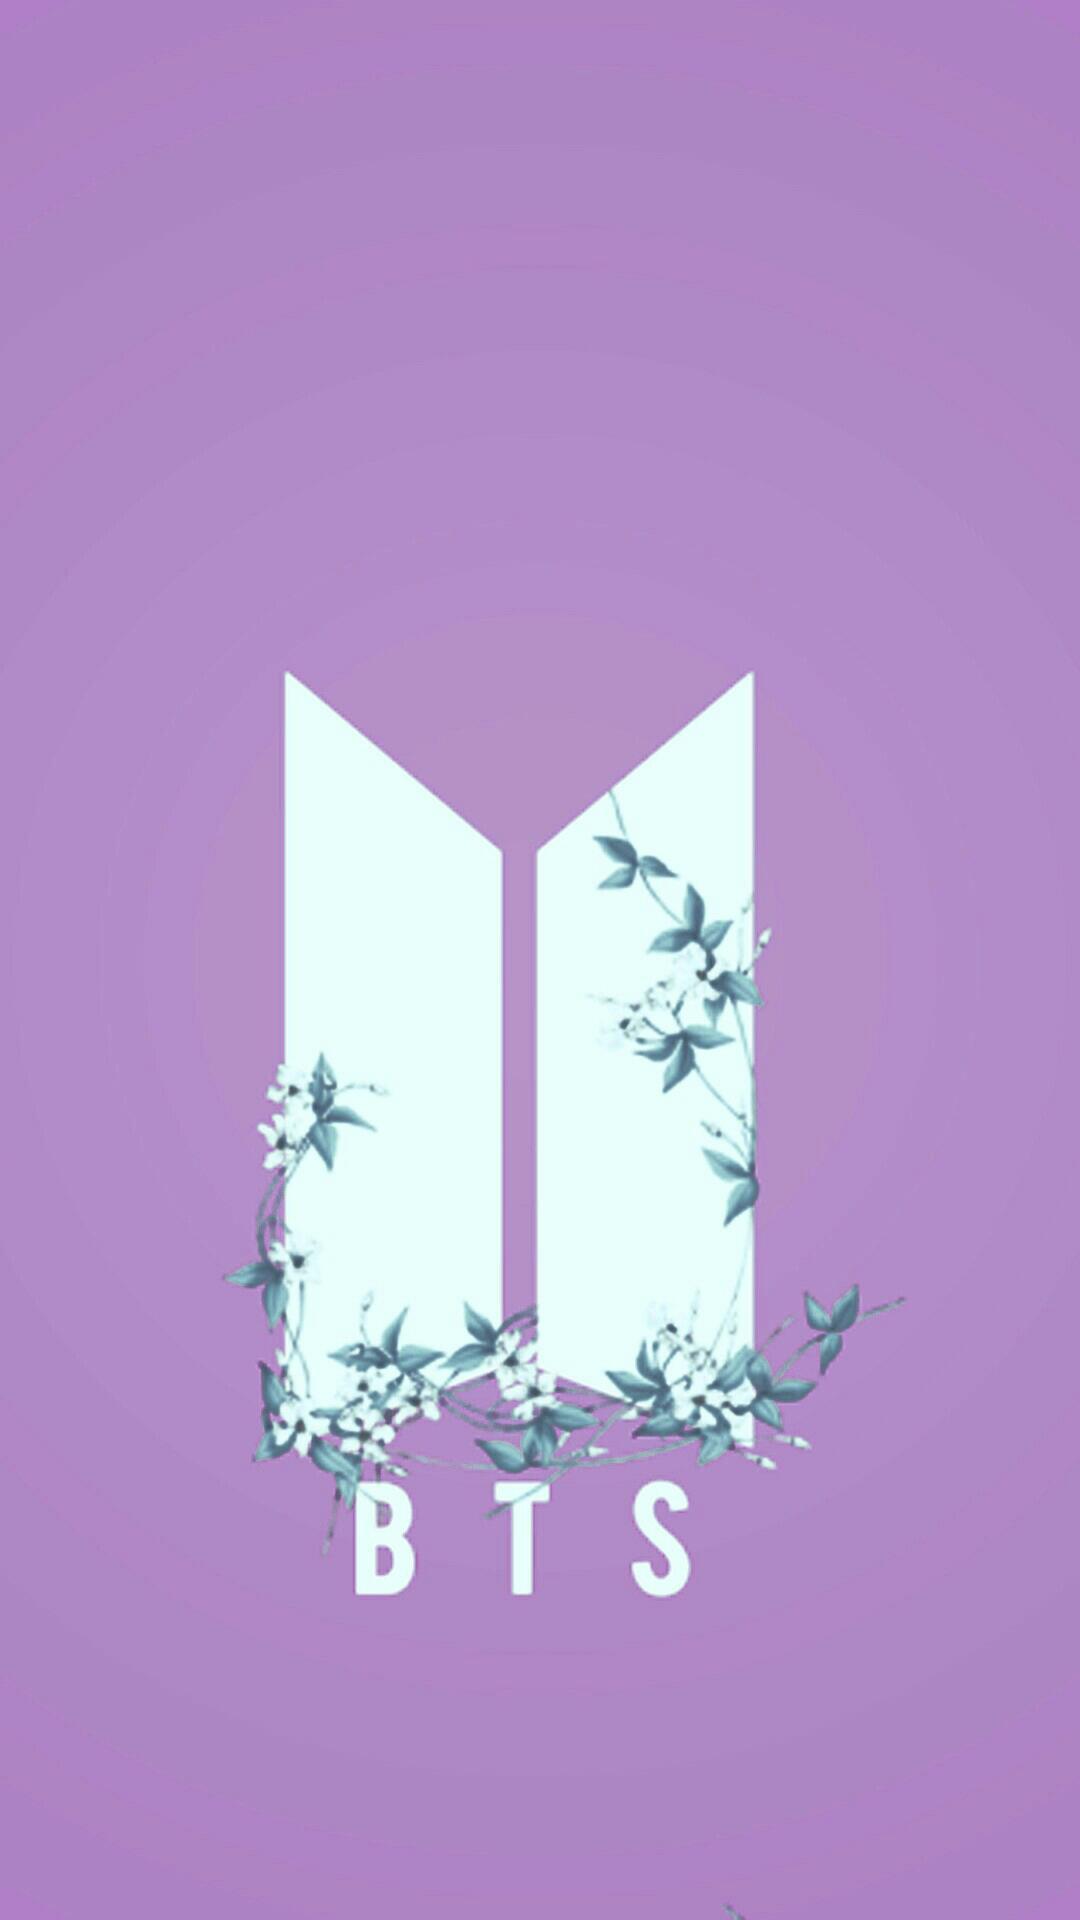 BTS wallpaper HD for Android